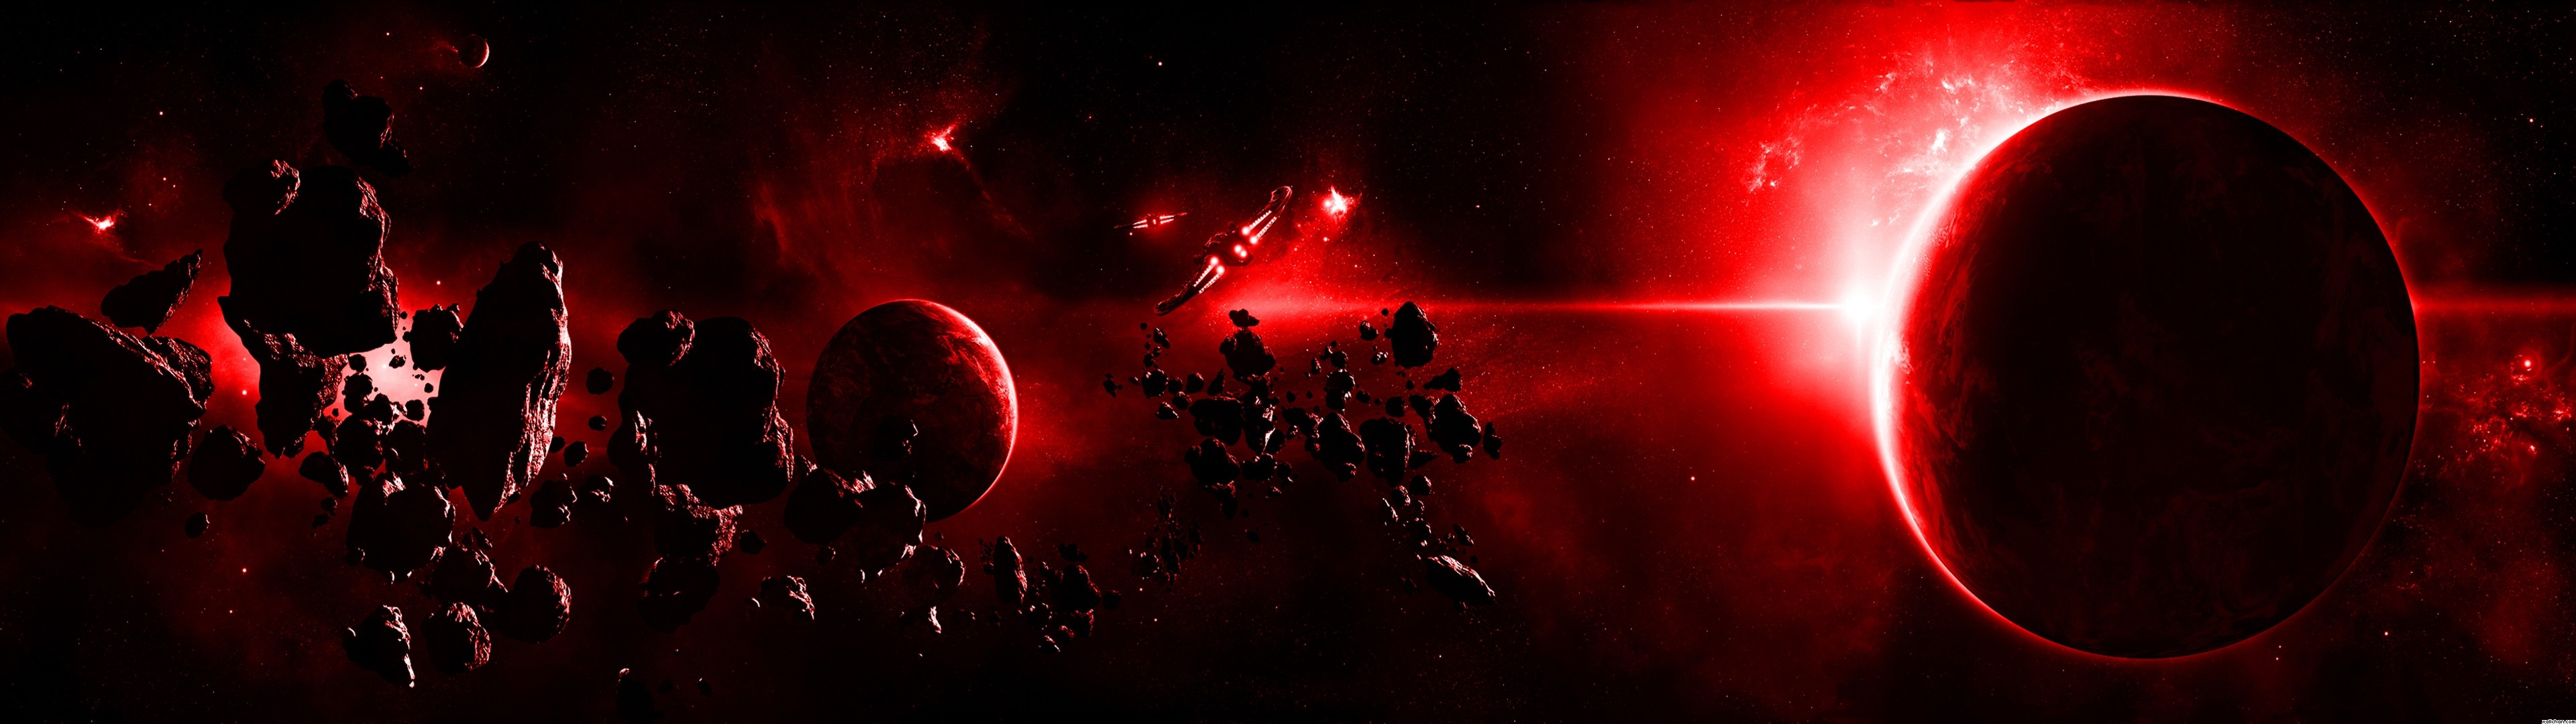 3840x1080 red and black wallpaper 1080p - photo #6. Torrentz Search Engine